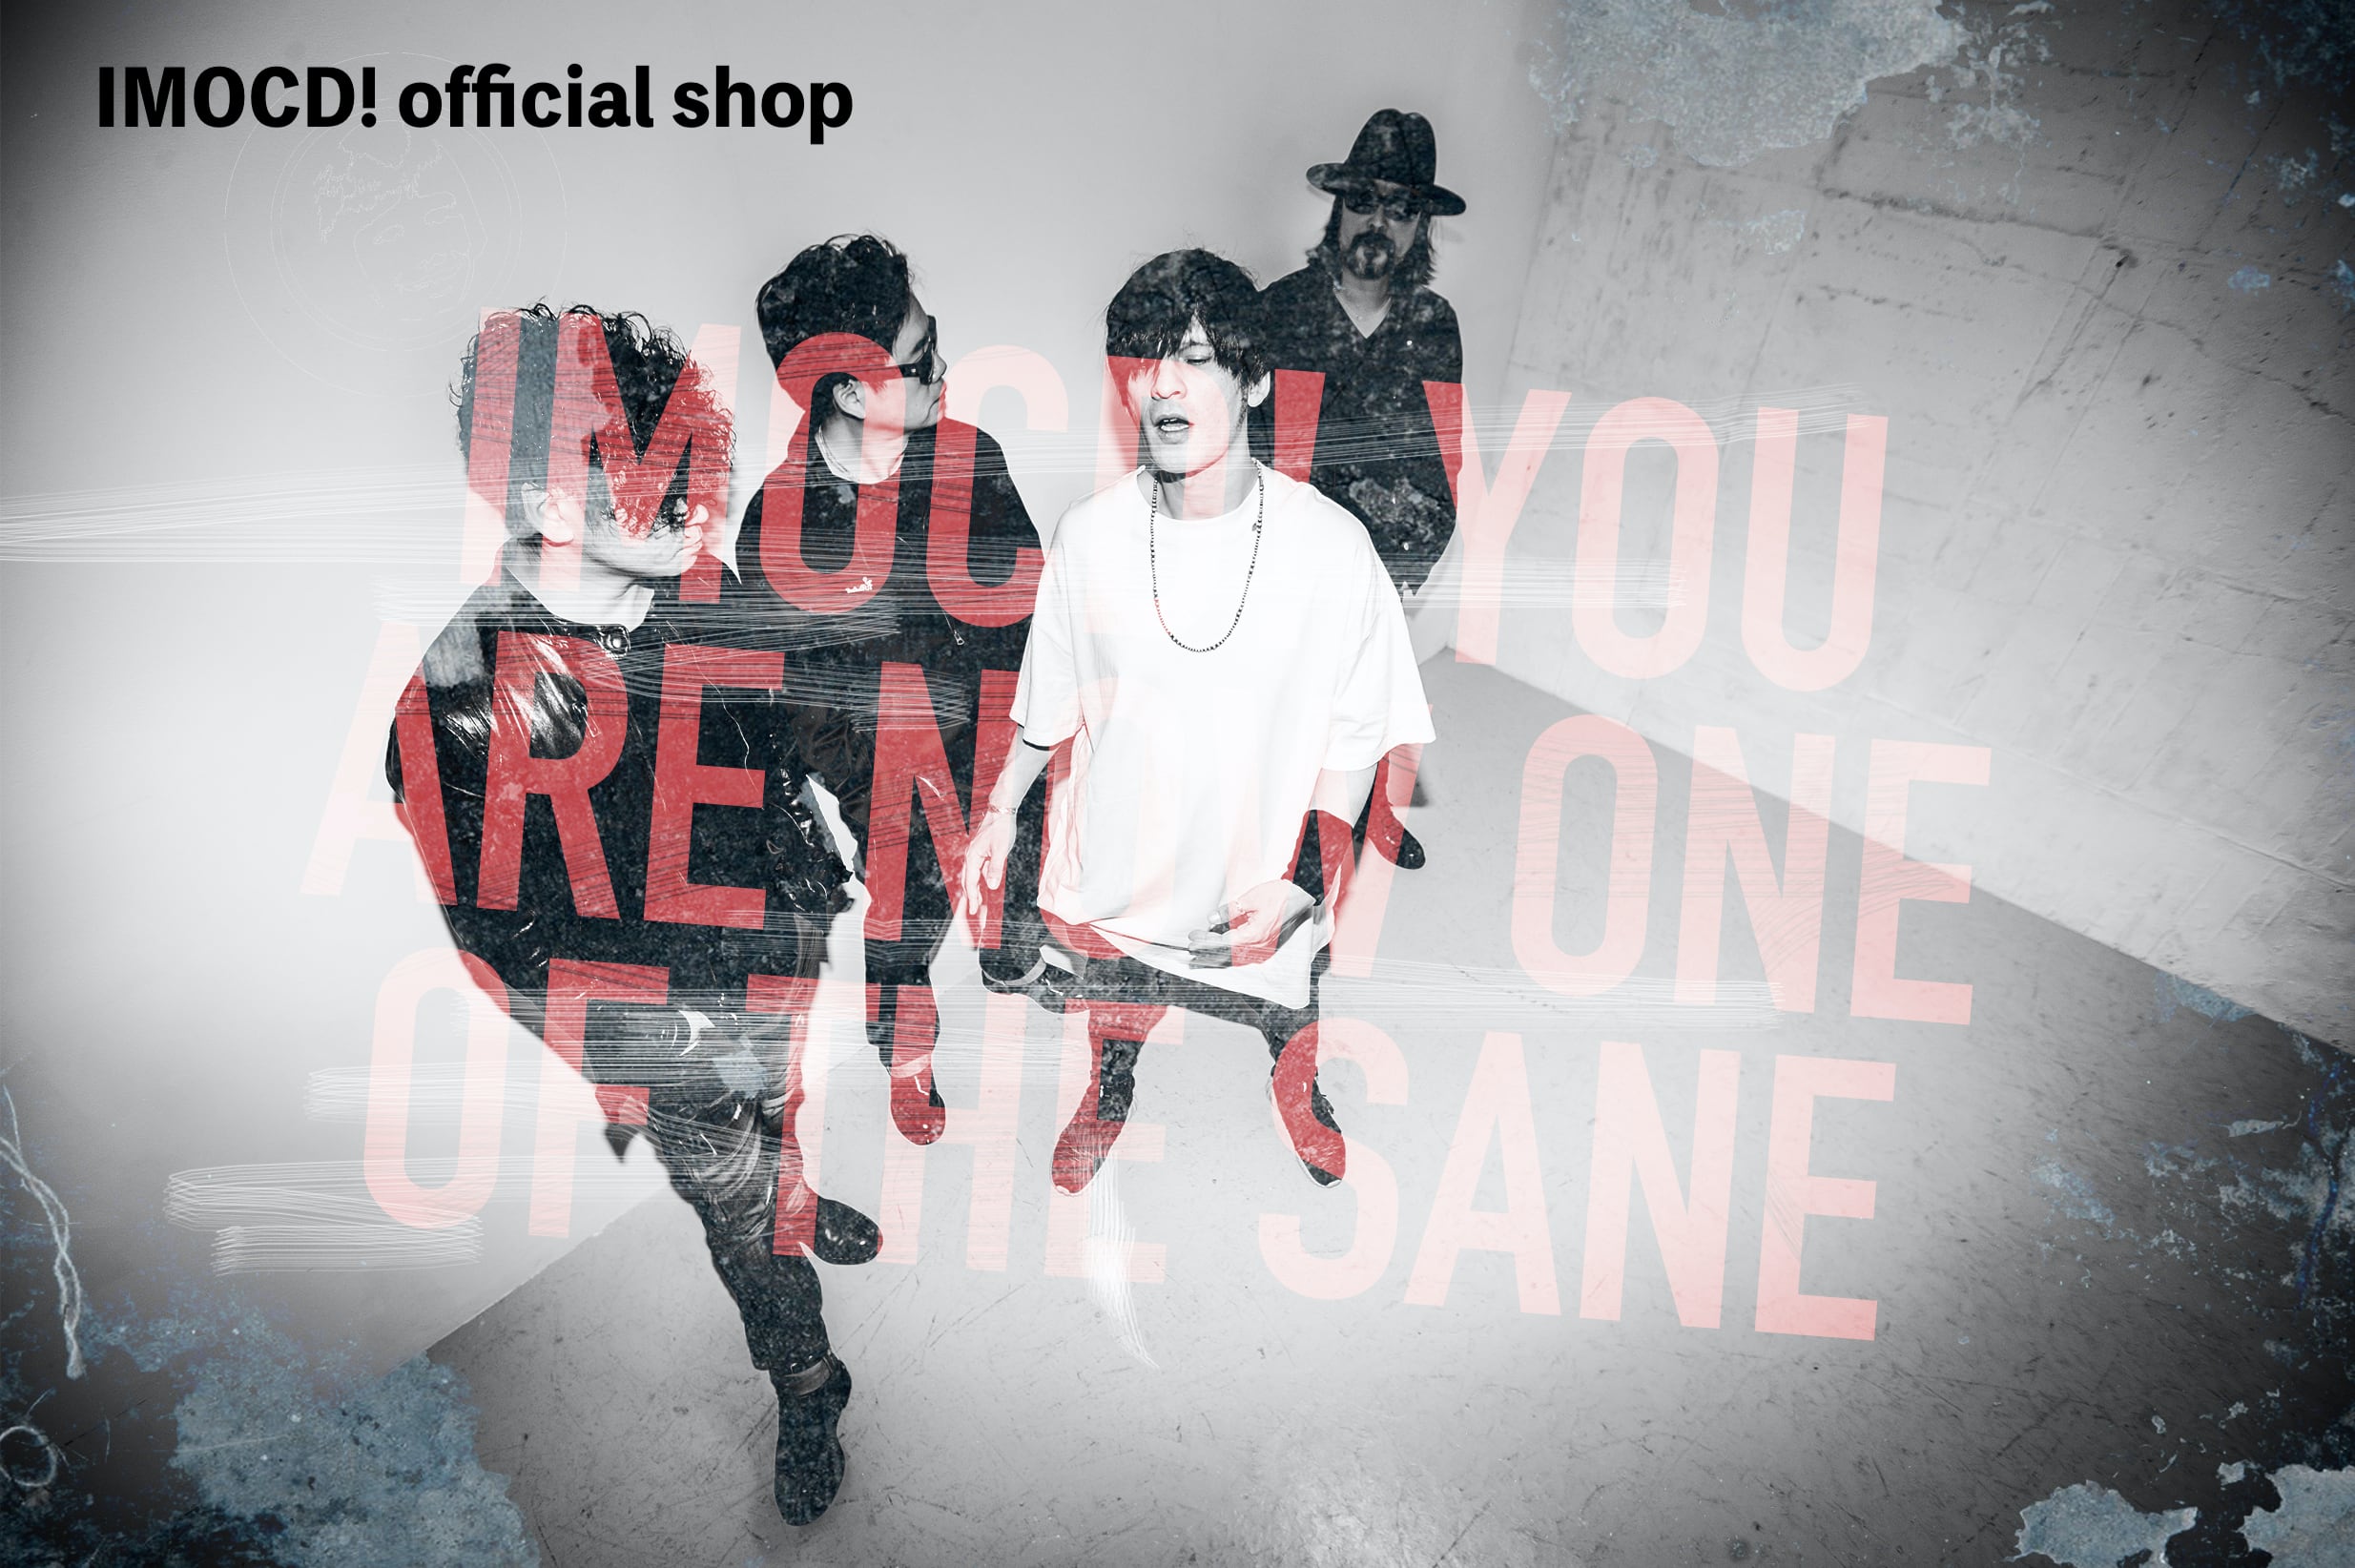 IMOCD! official shop